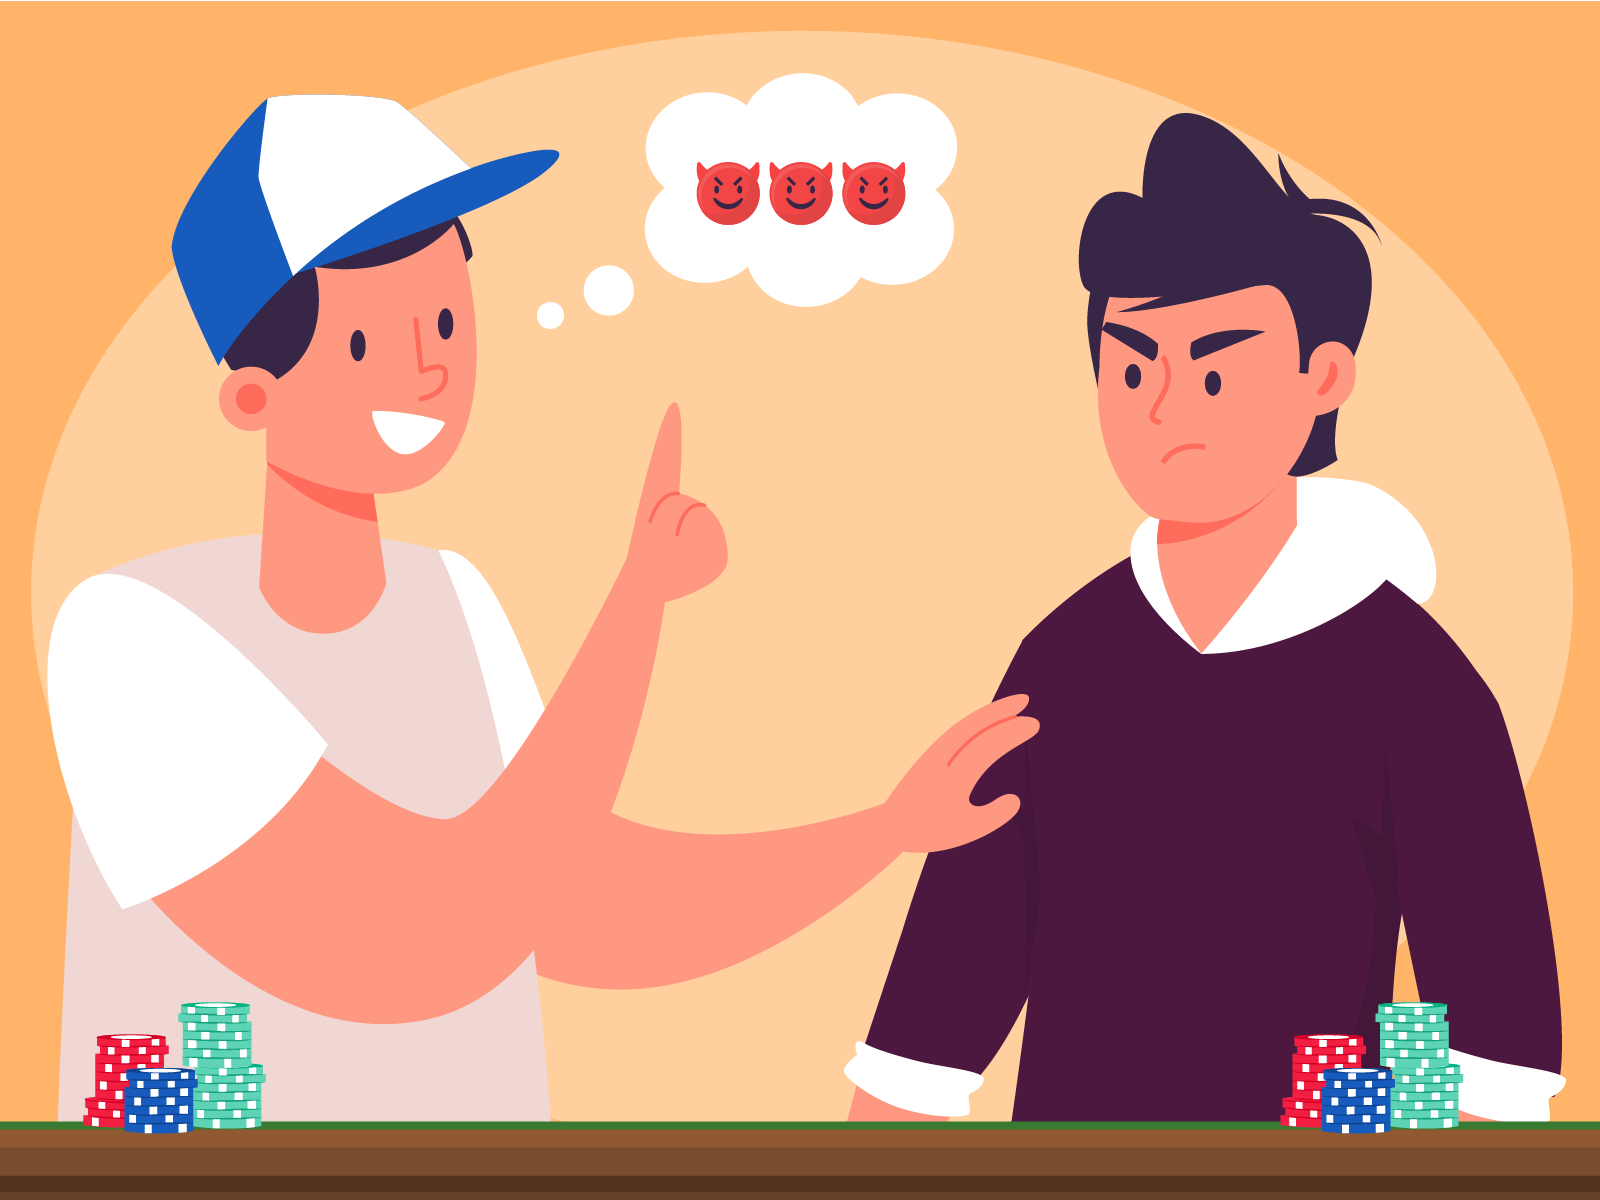 Person giving advice in poker, with bad intentions